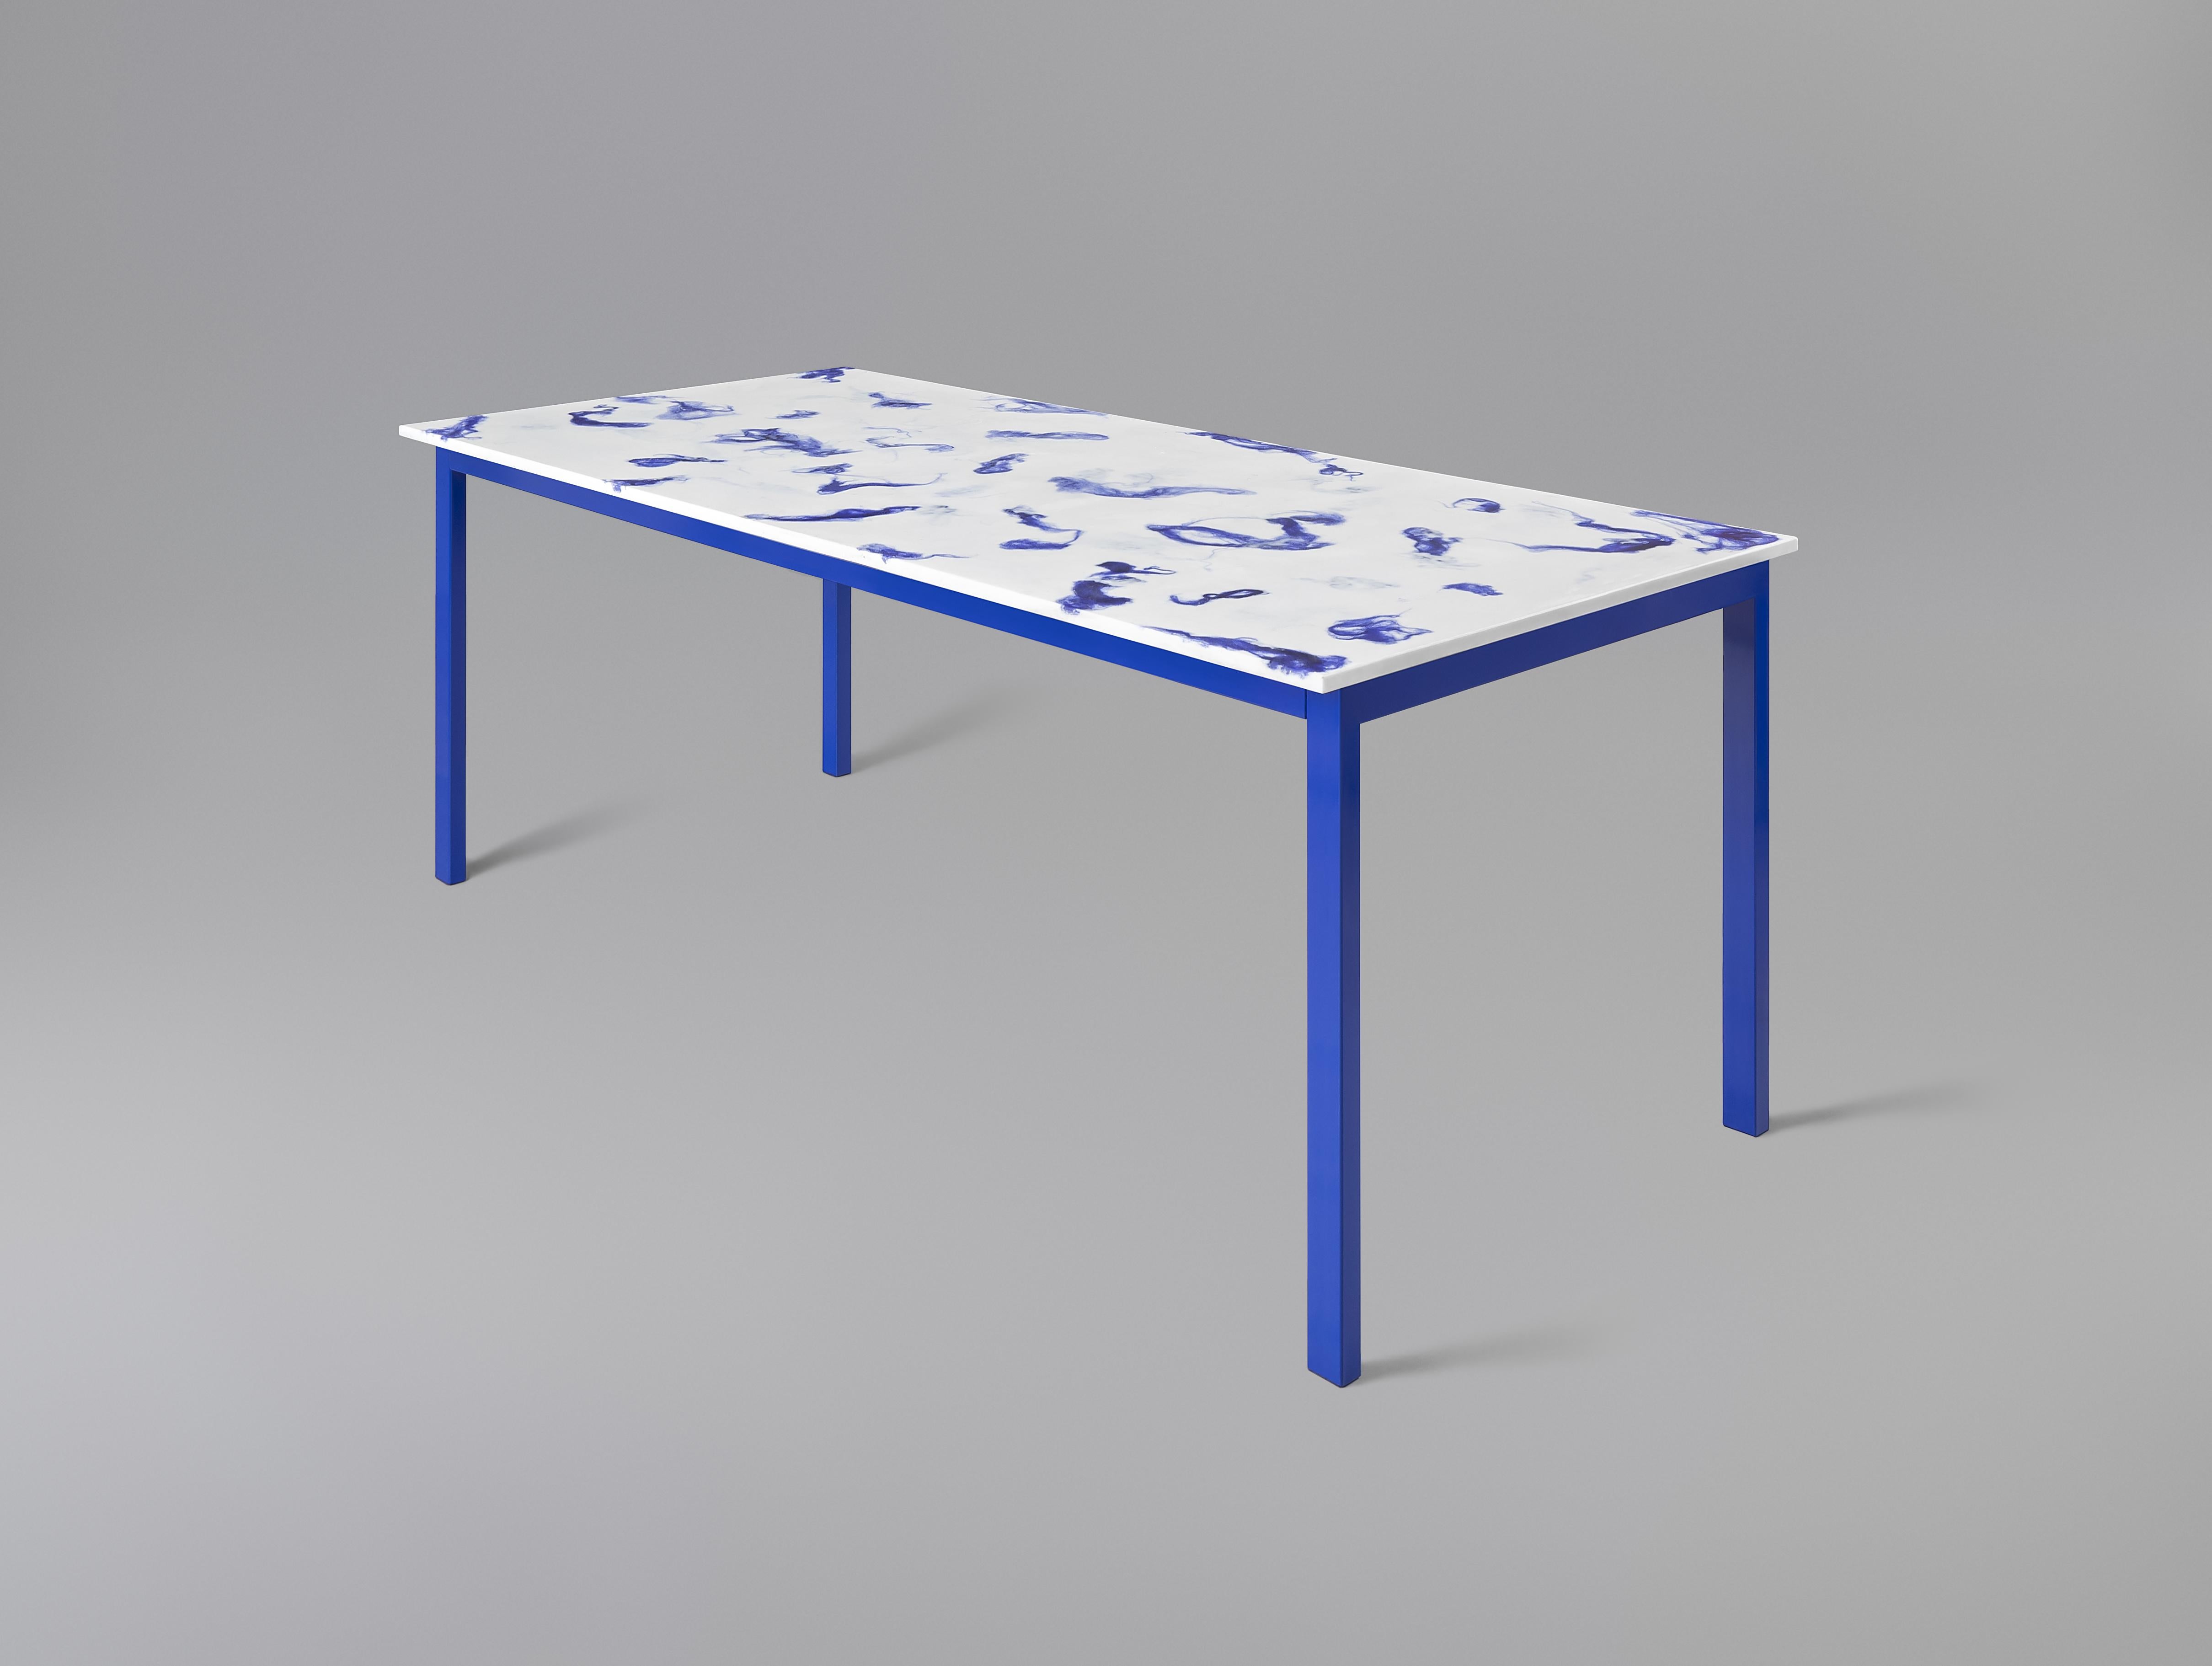 Bauhaus Contemporary Marco Guazzini Dining Table Carrara Marble Wool Effect Blue White For Sale